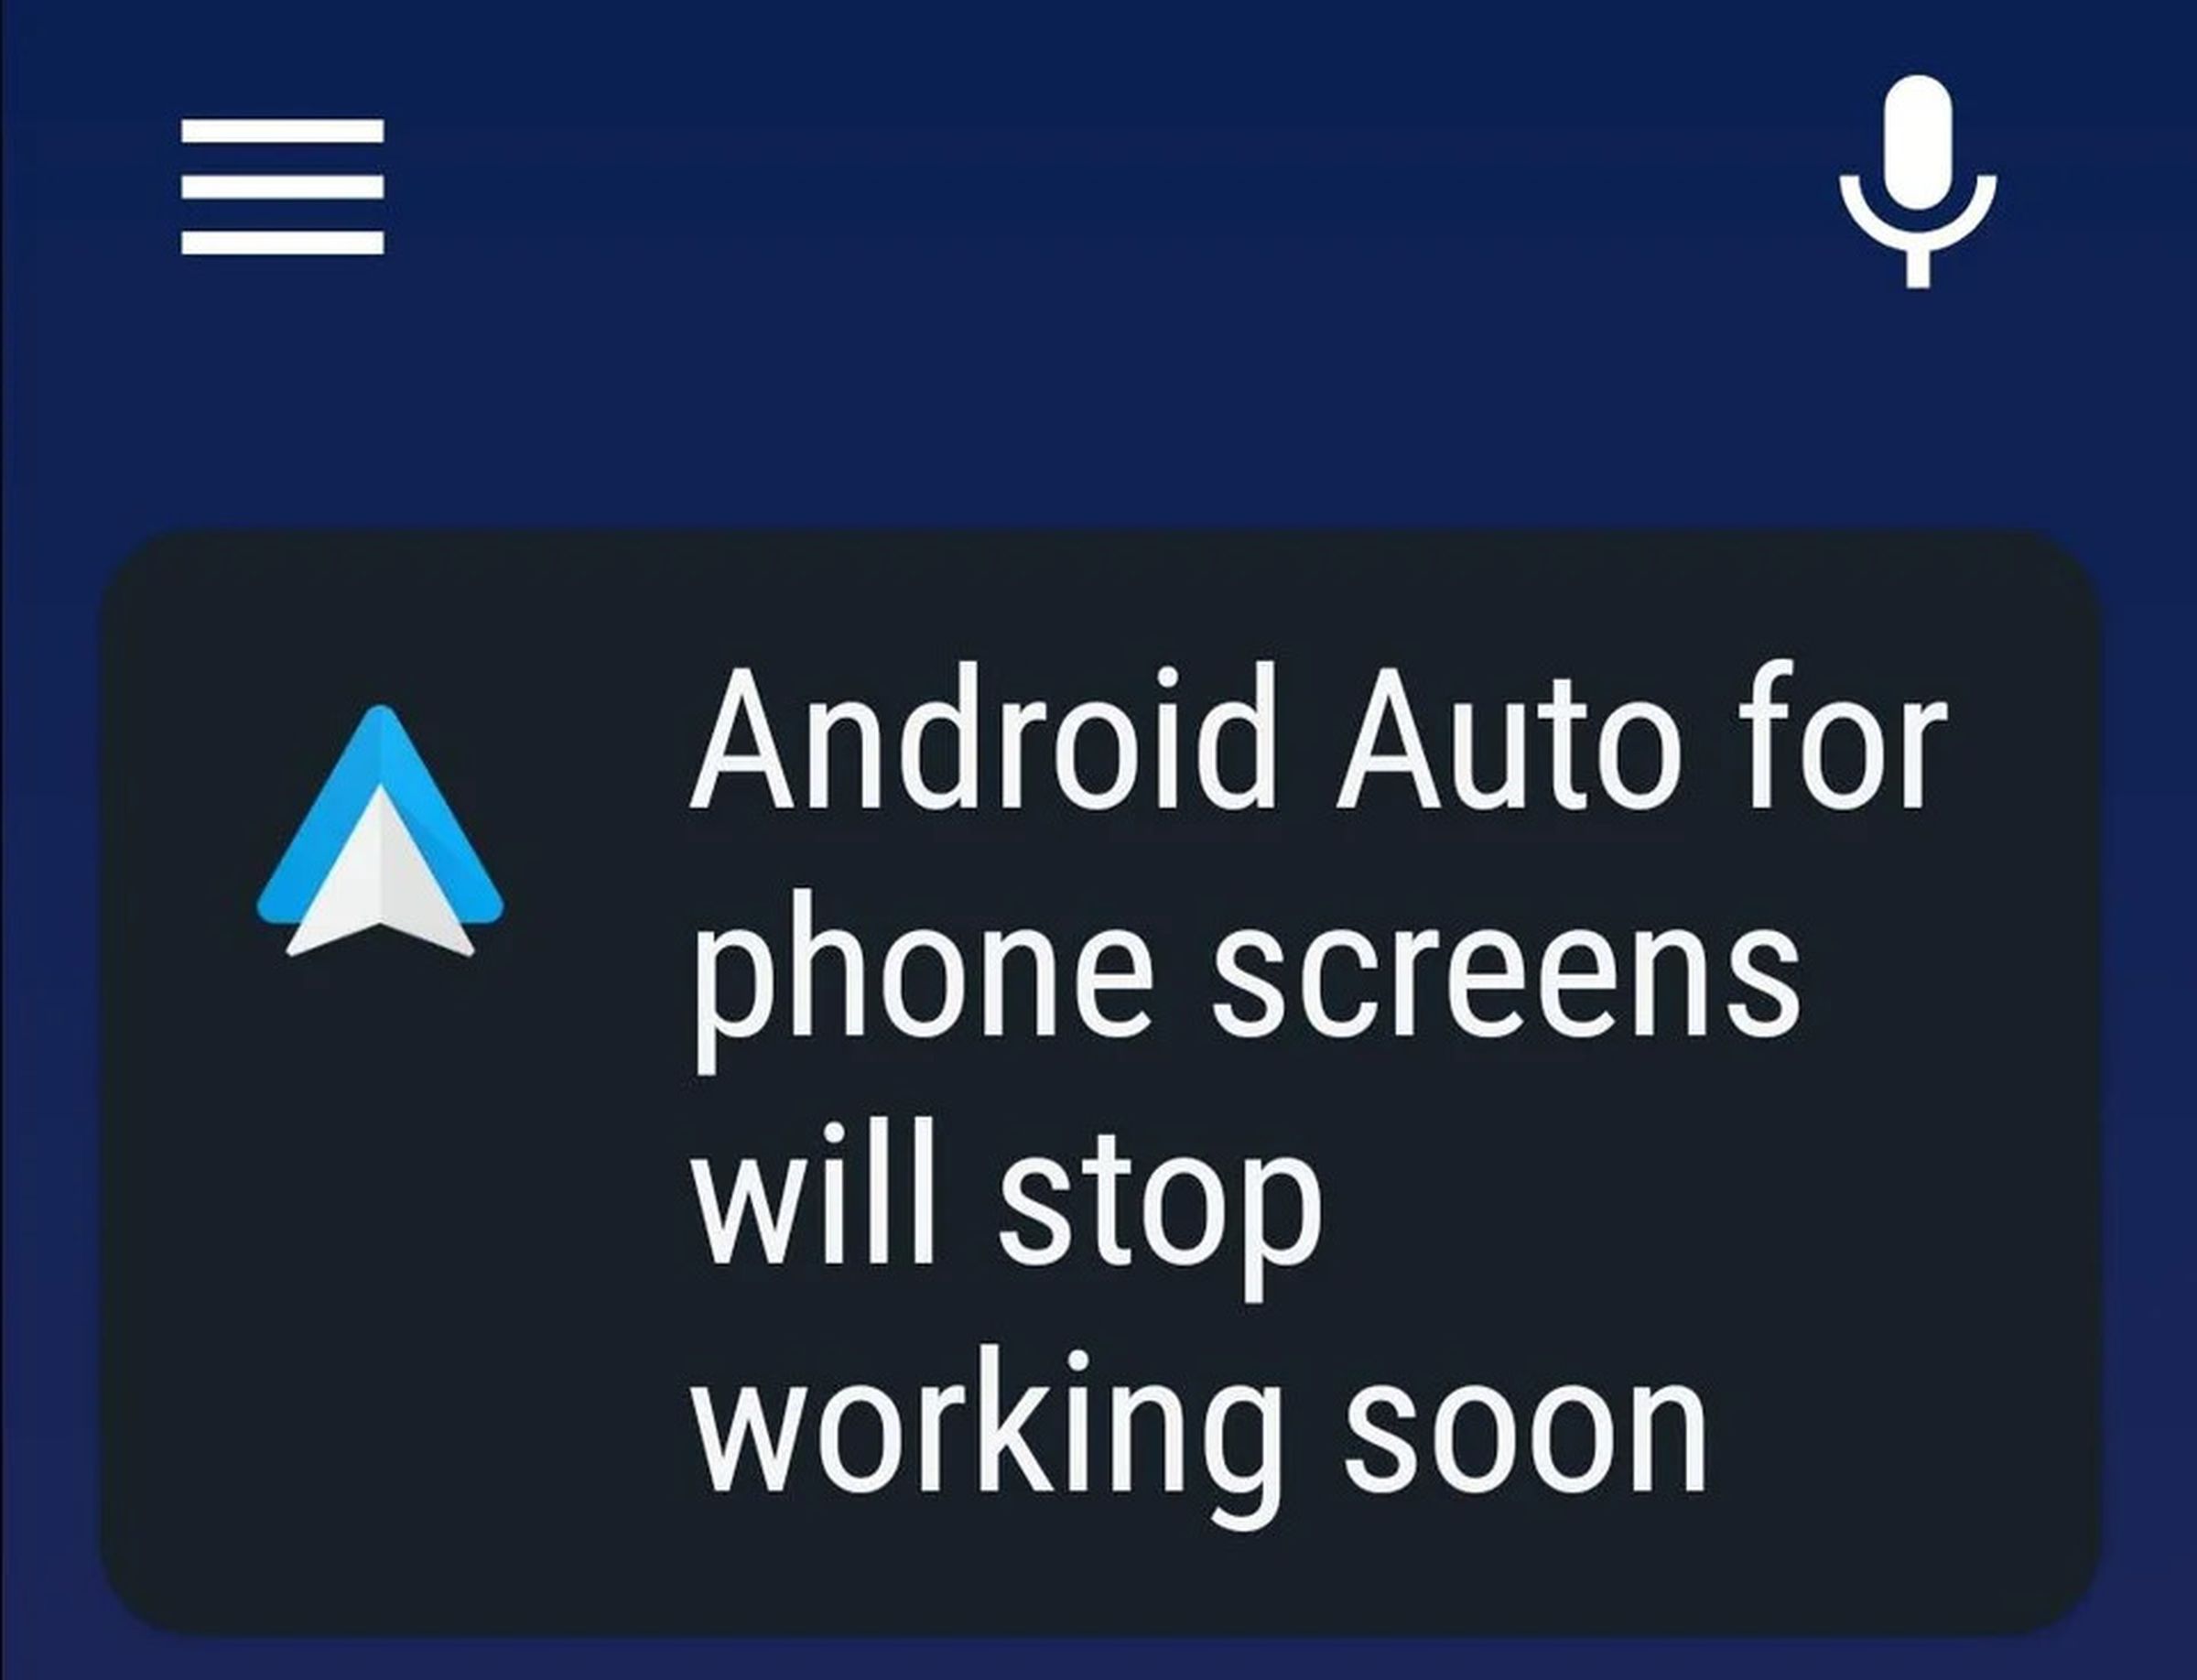 This message appeared in the app on a Huawei P30 Lite running Android 10.